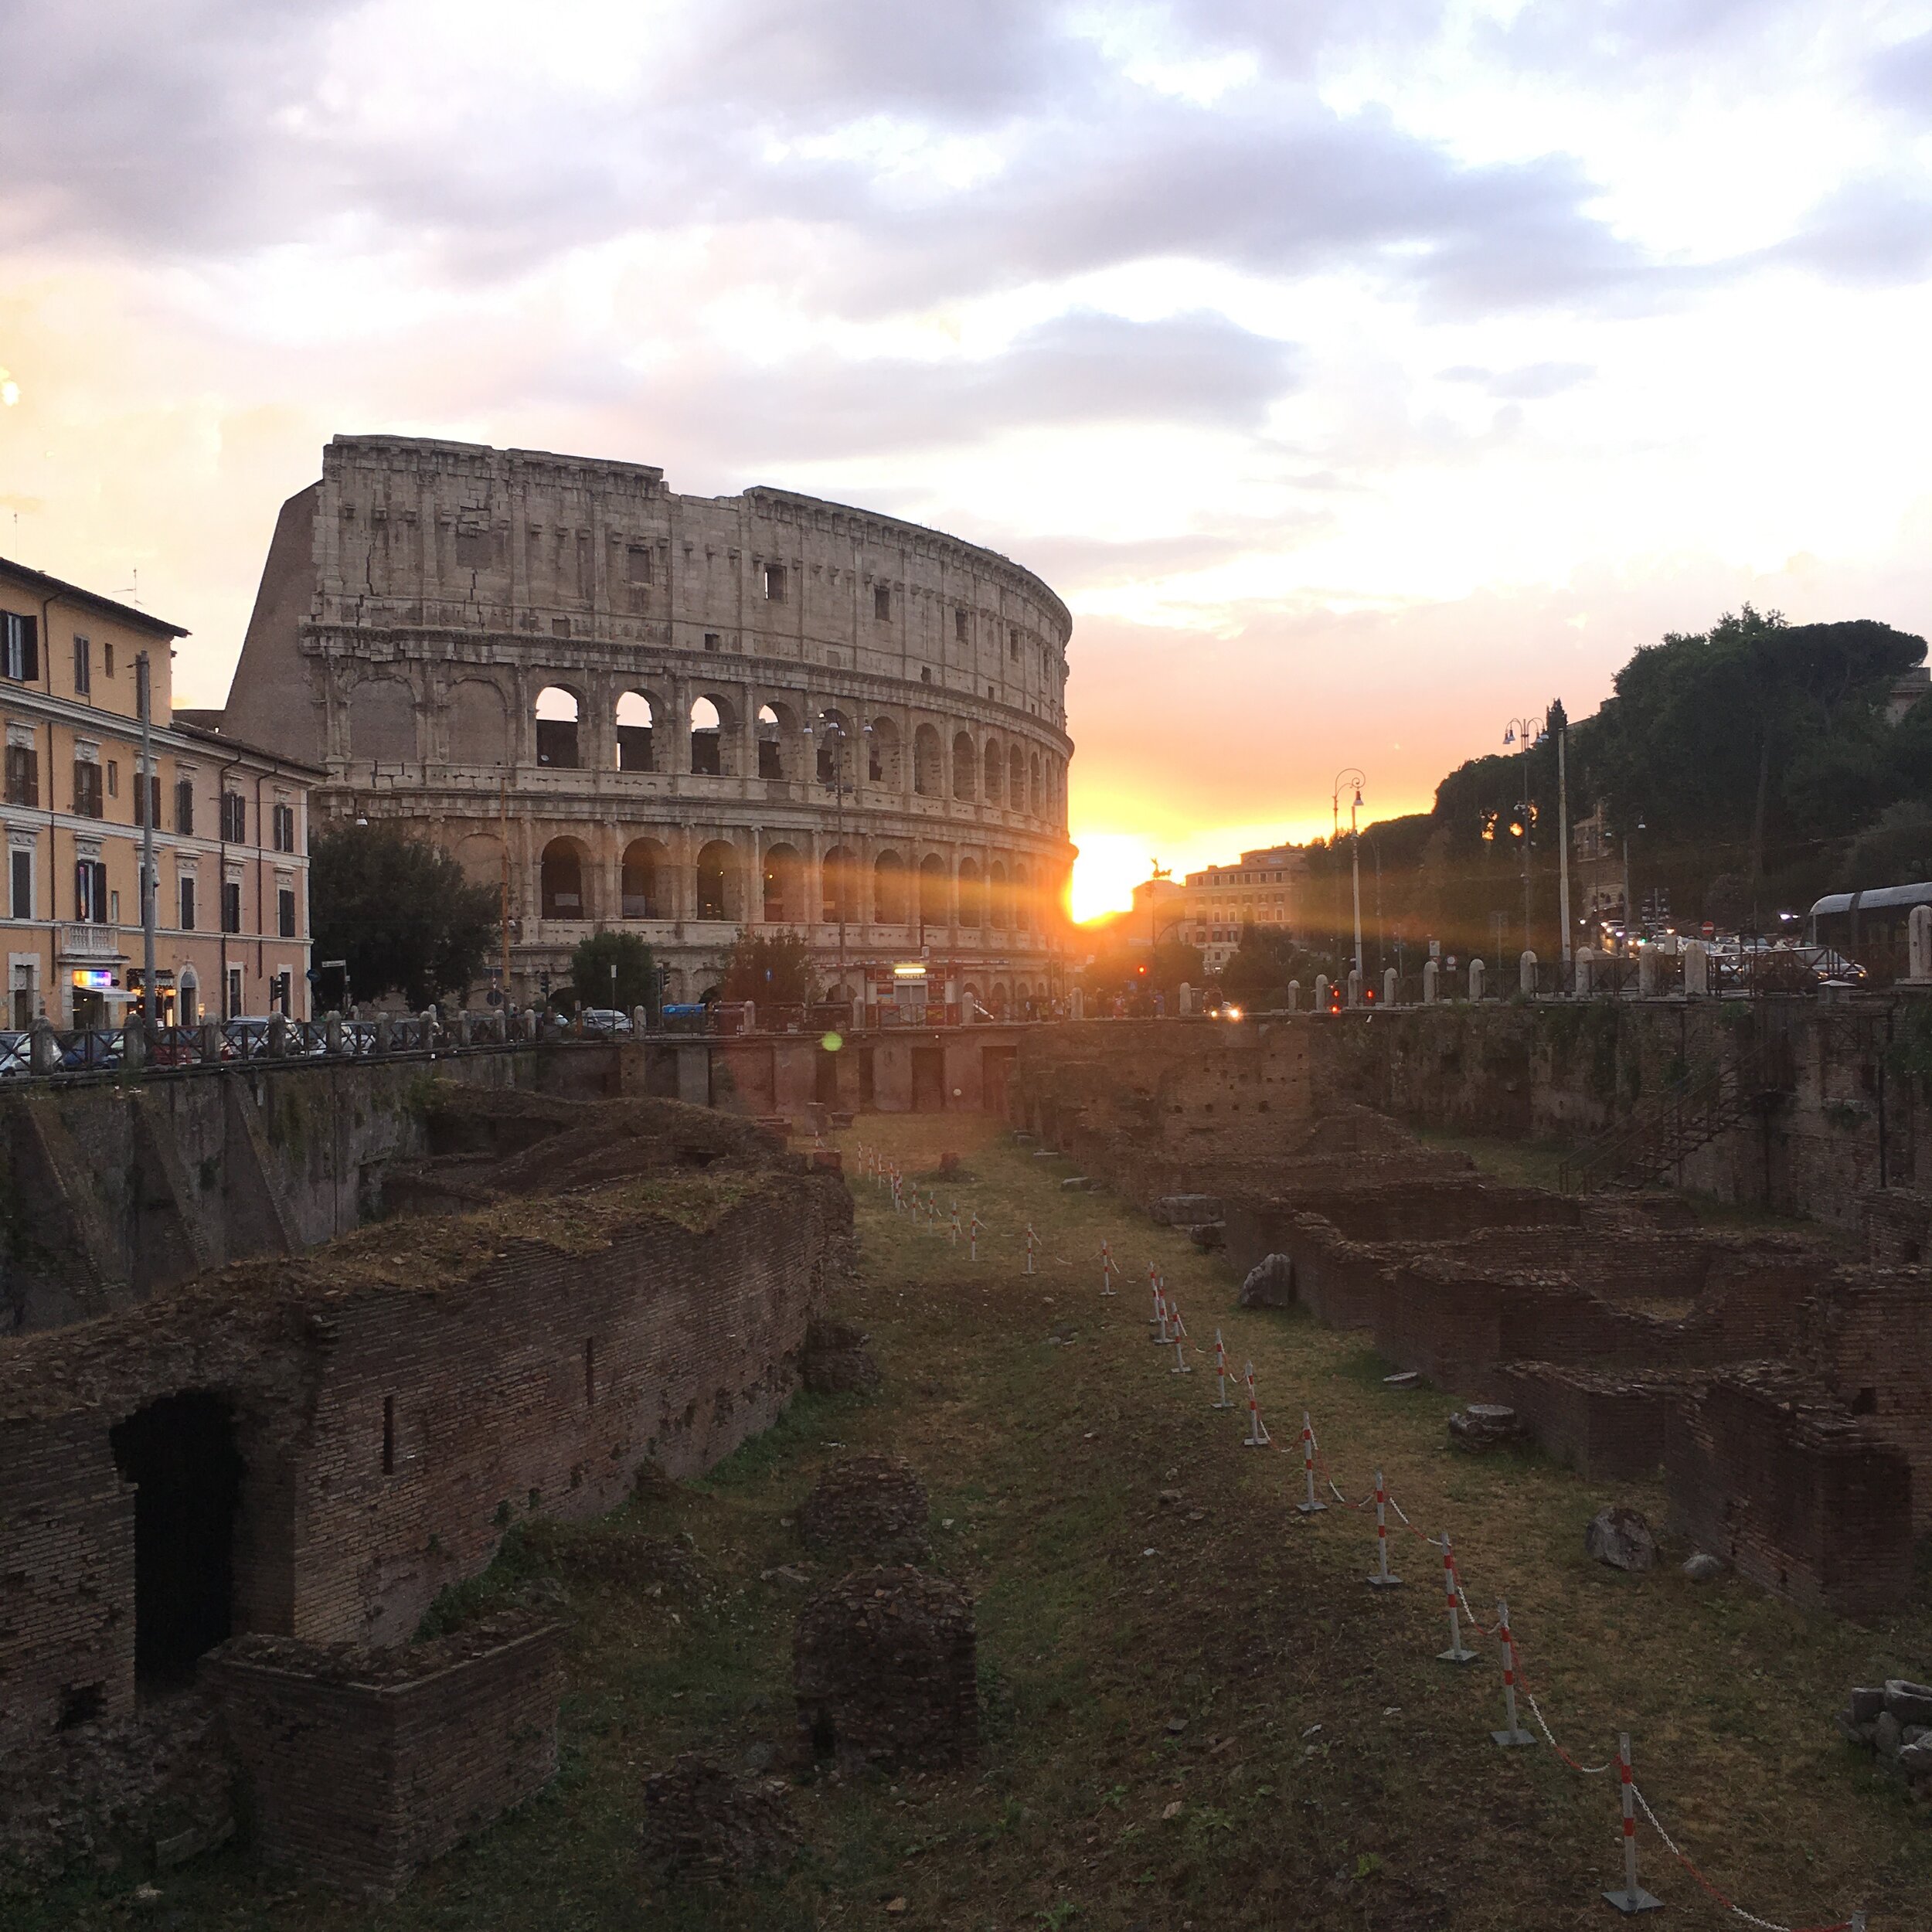 Aperitivo and Sunset in front of Coliseum - Rome 